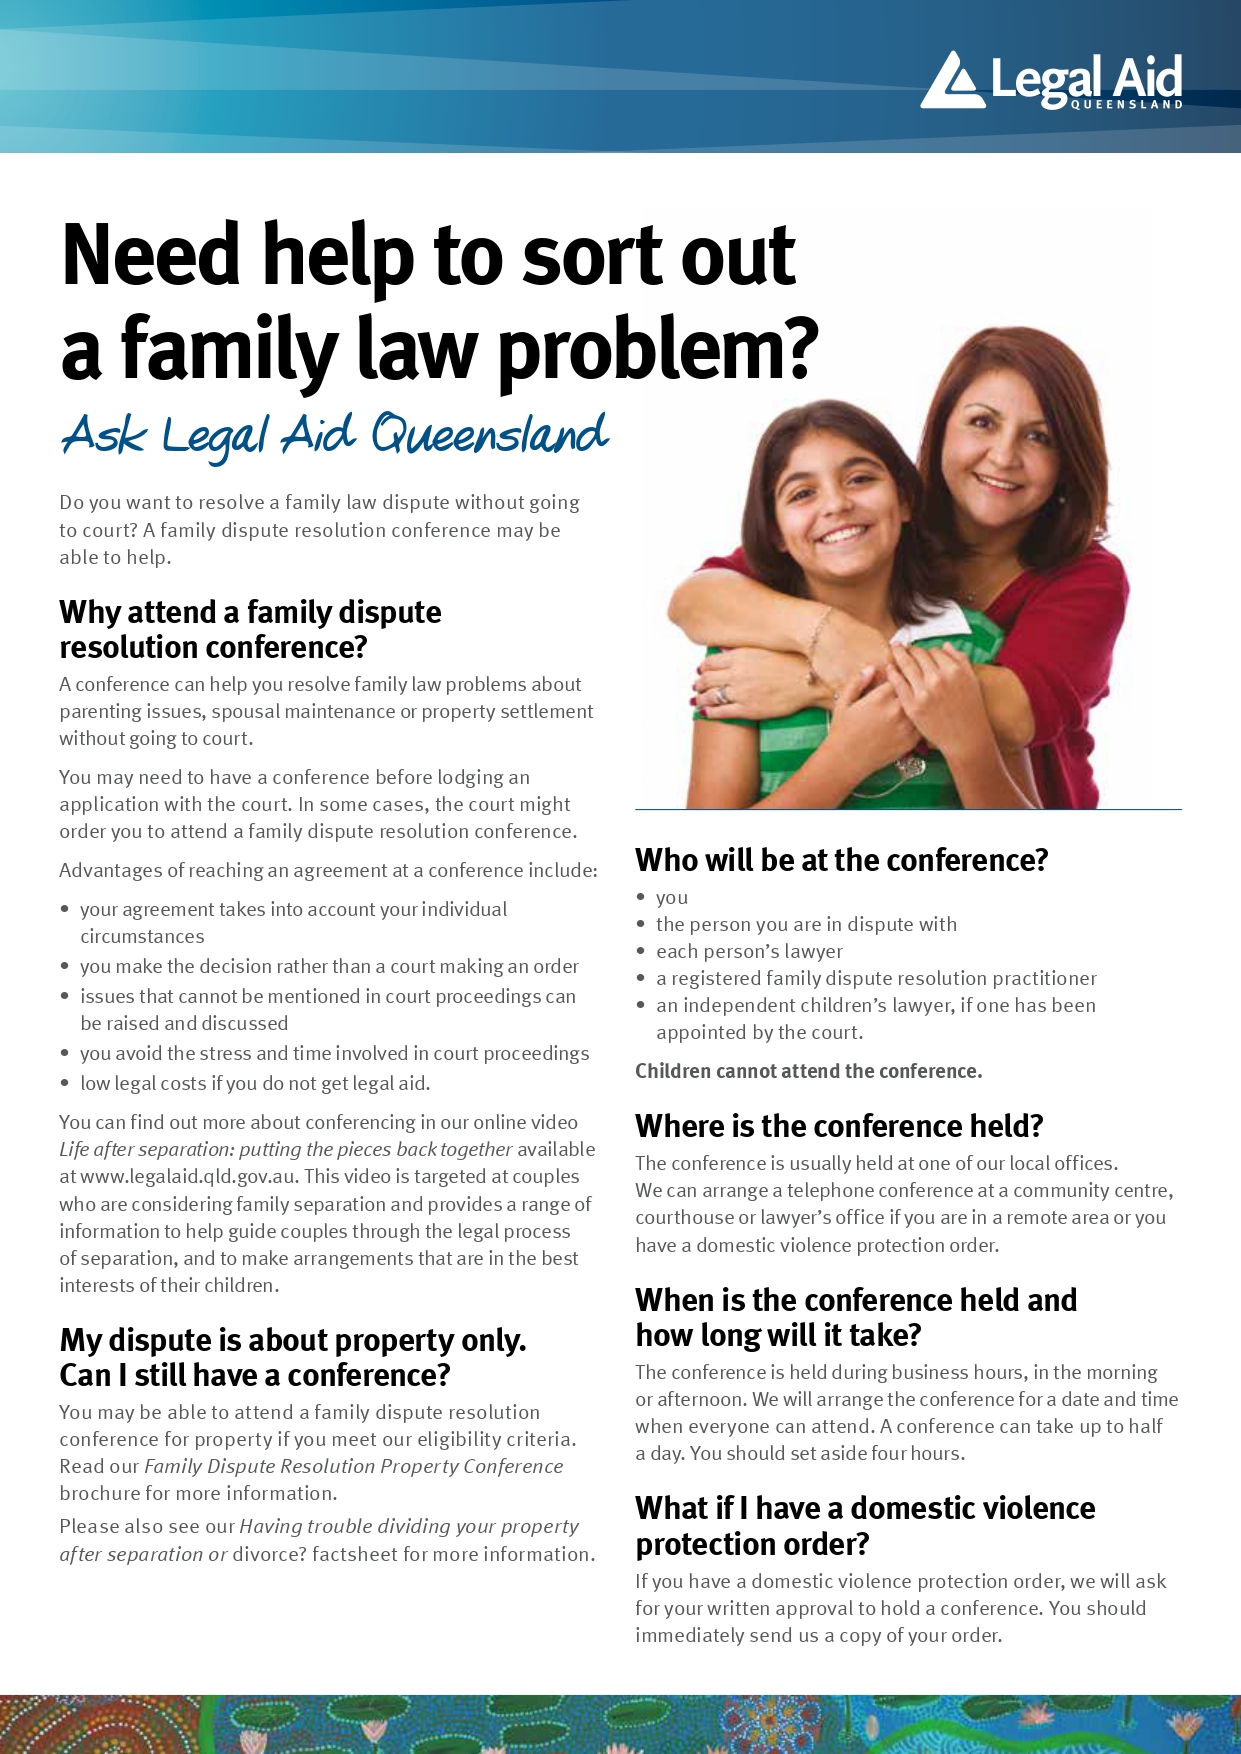 Need help to sort out a family law problem? (1)